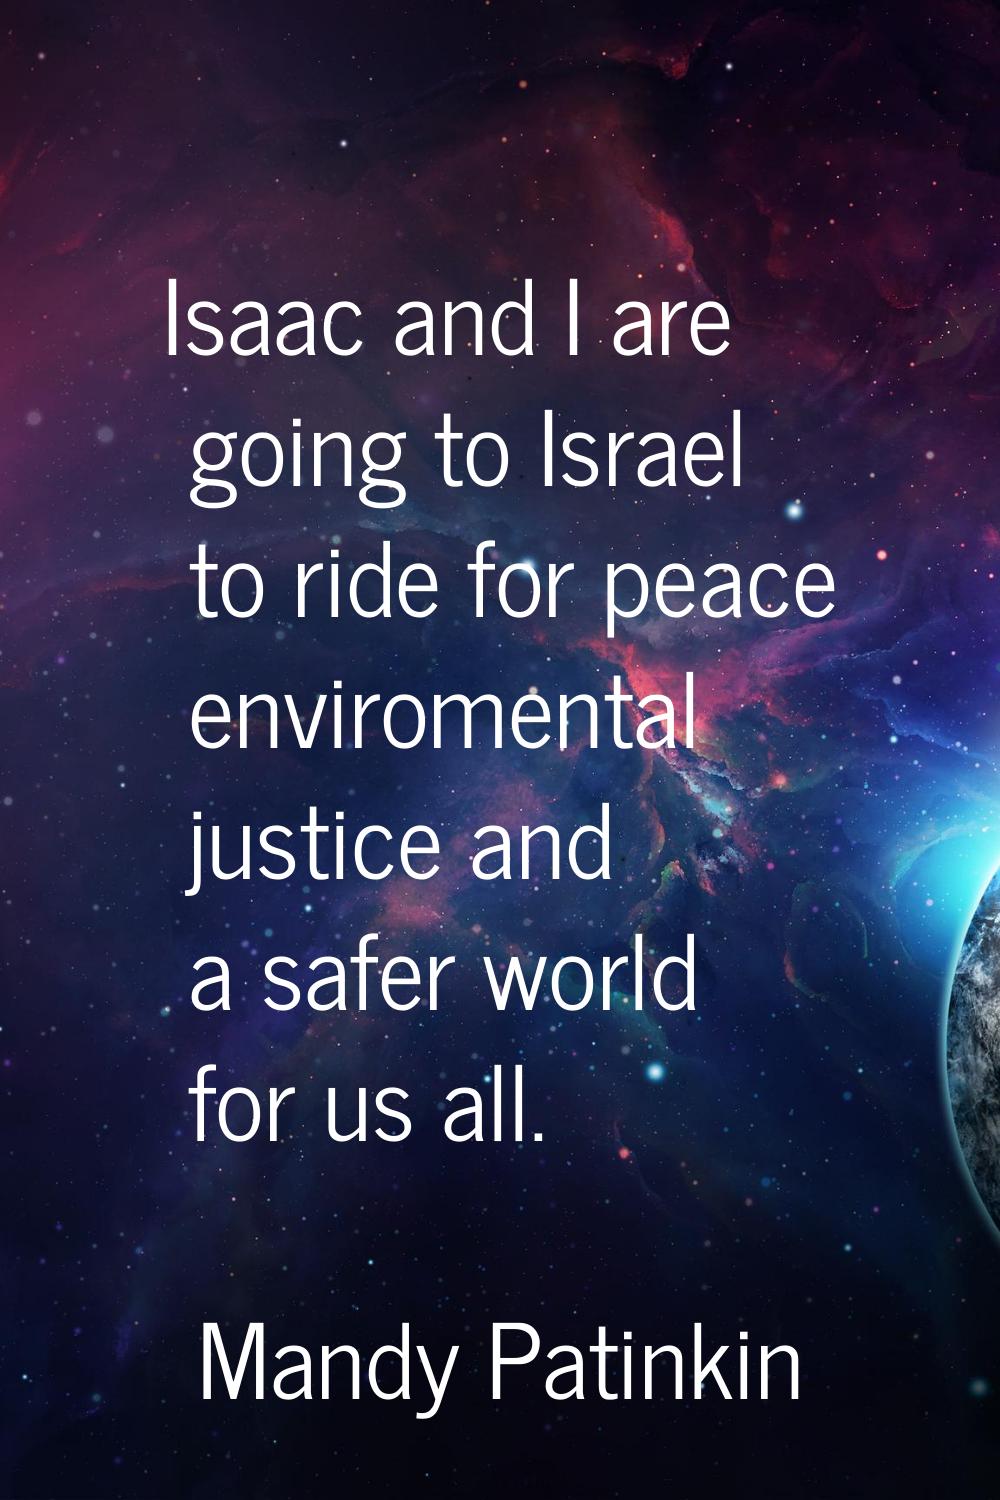 Isaac and I are going to Israel to ride for peace enviromental justice and a safer world for us all